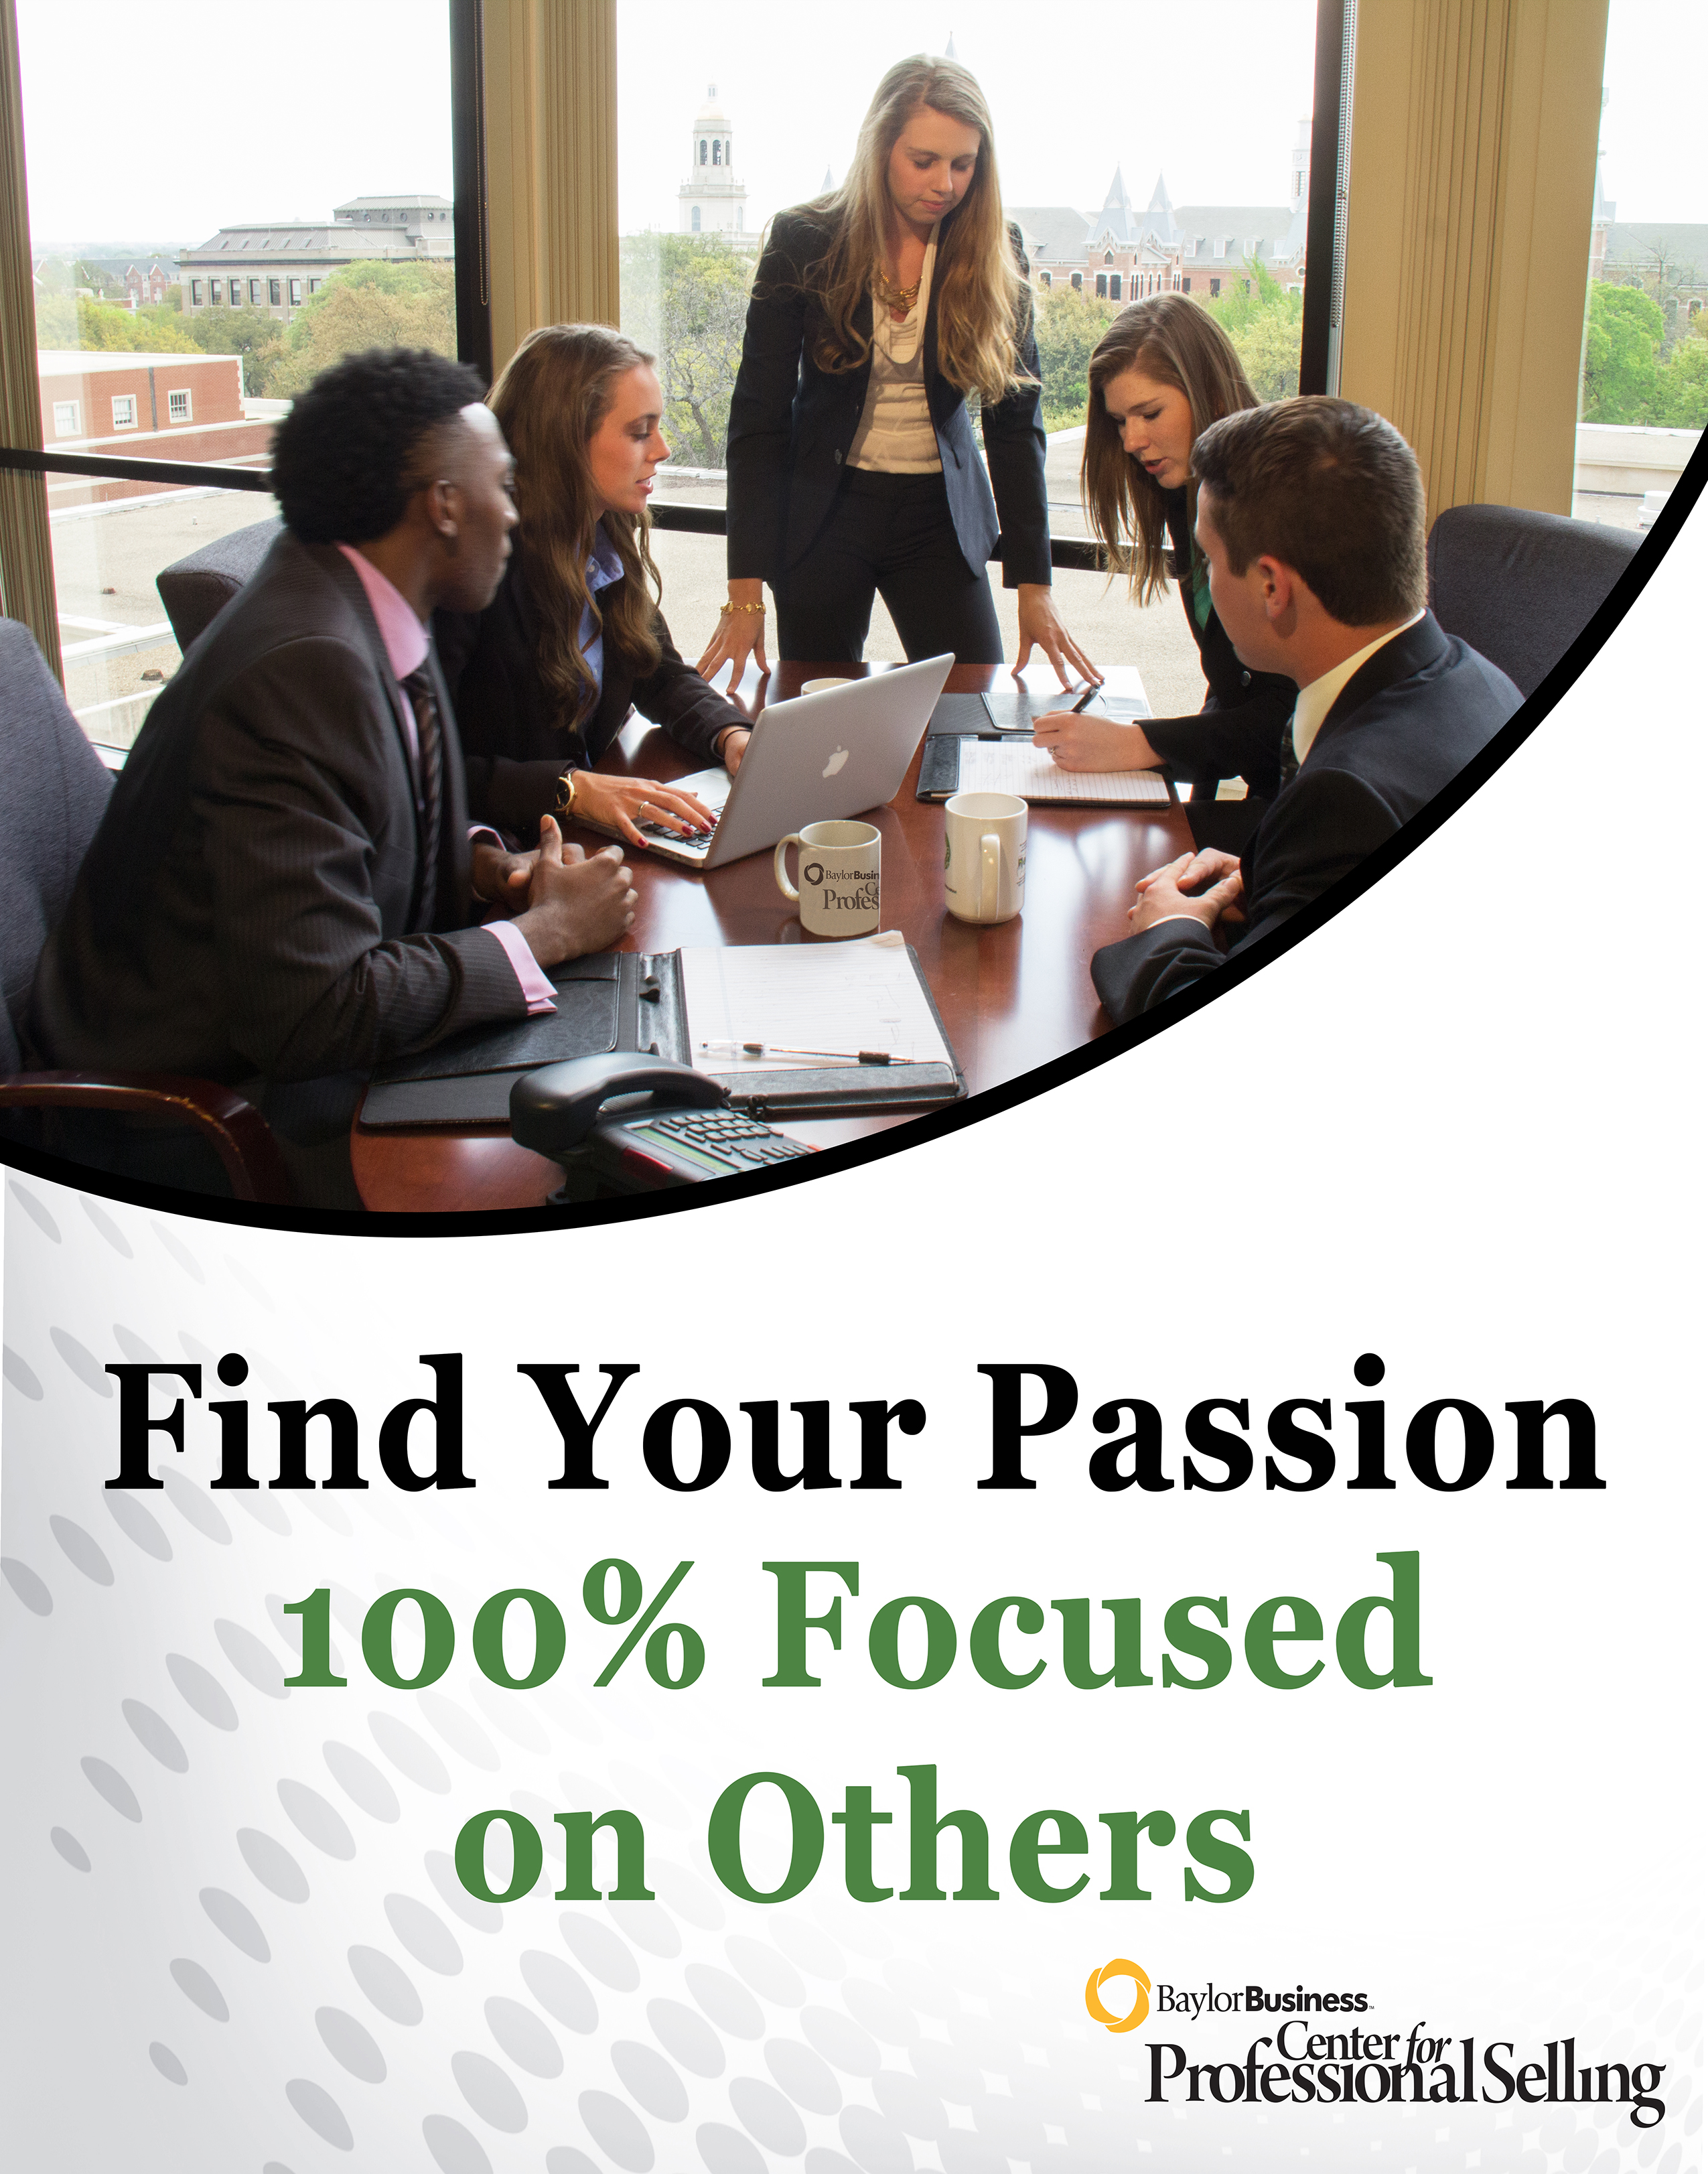 Find Your Passion - 100% Focused on Others Ad 1